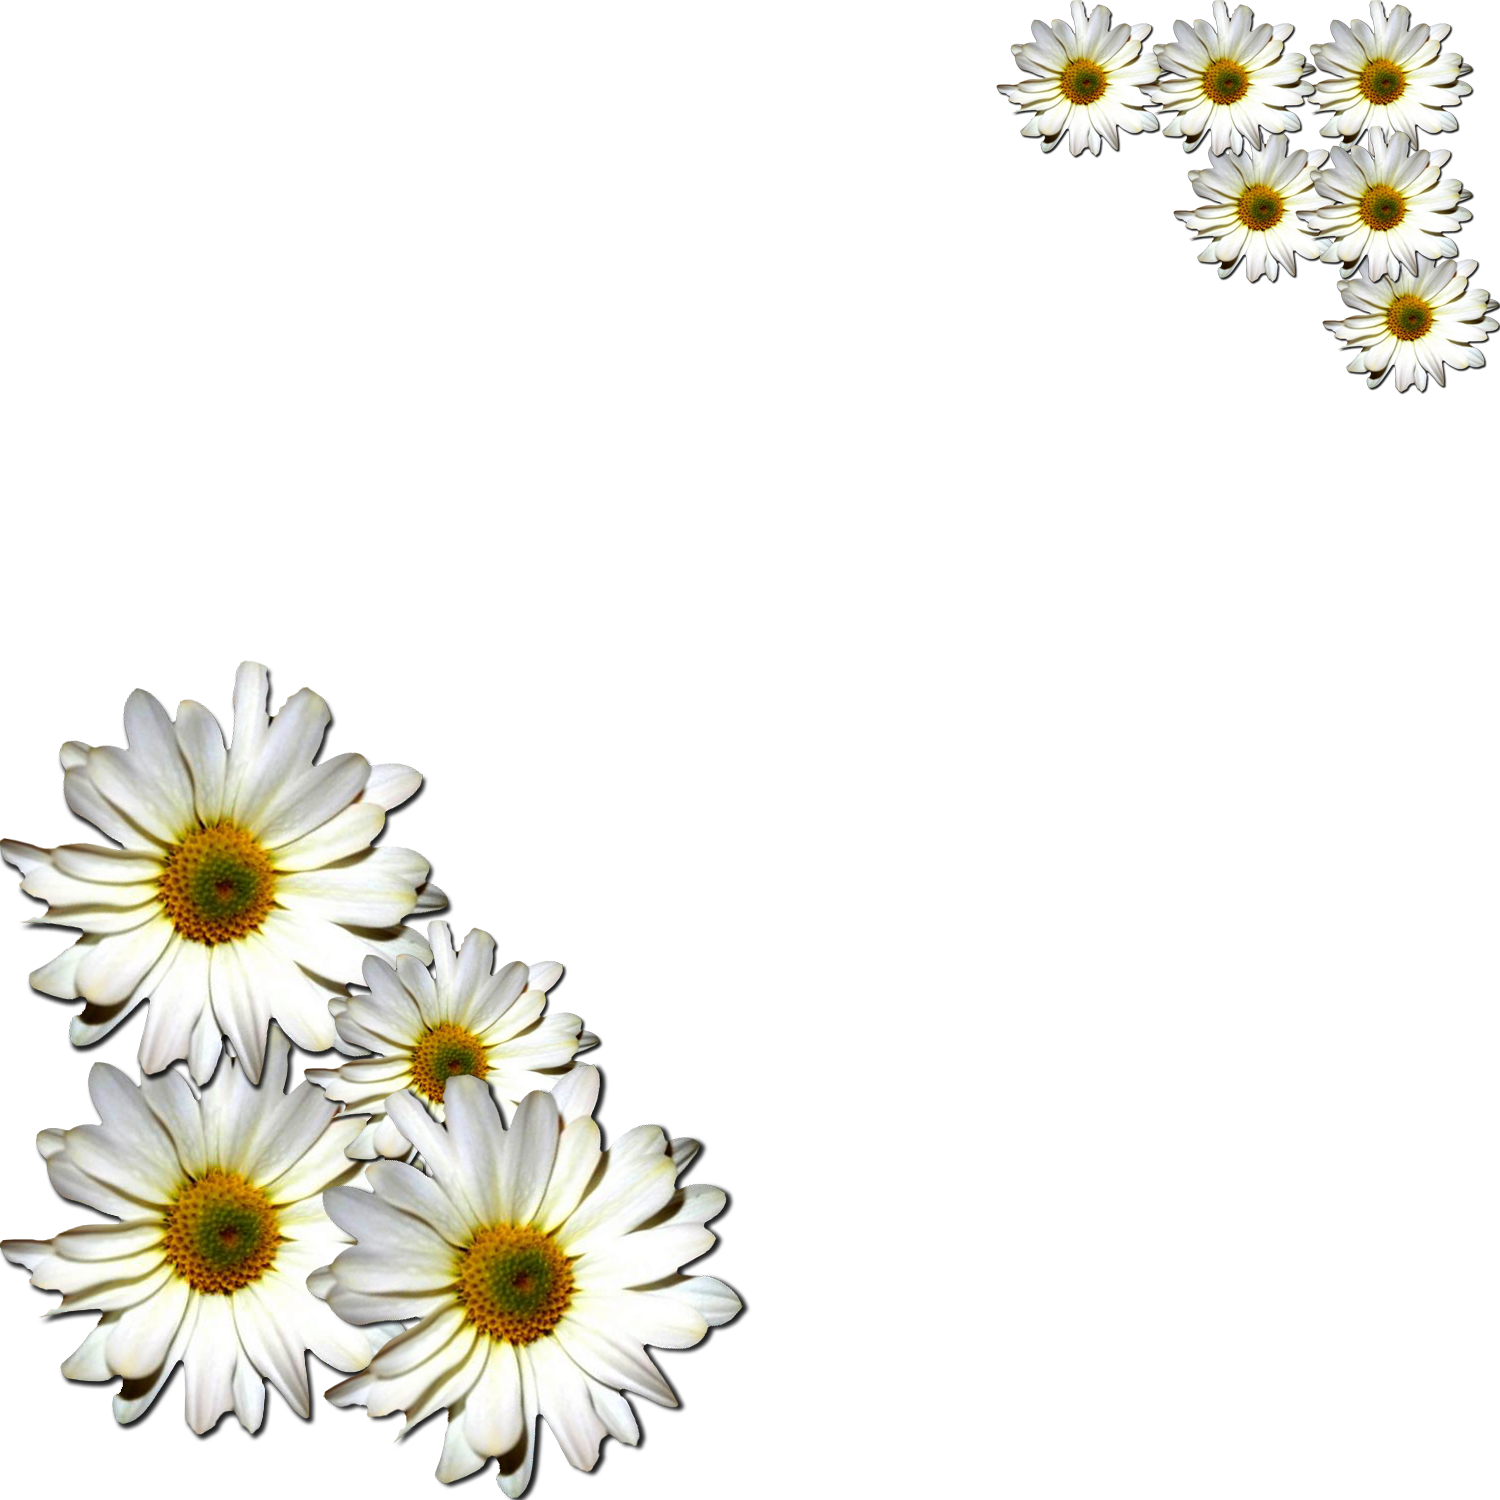 Common daisy Flower Clip art - daisy png download - 1023*1043 - Free ...